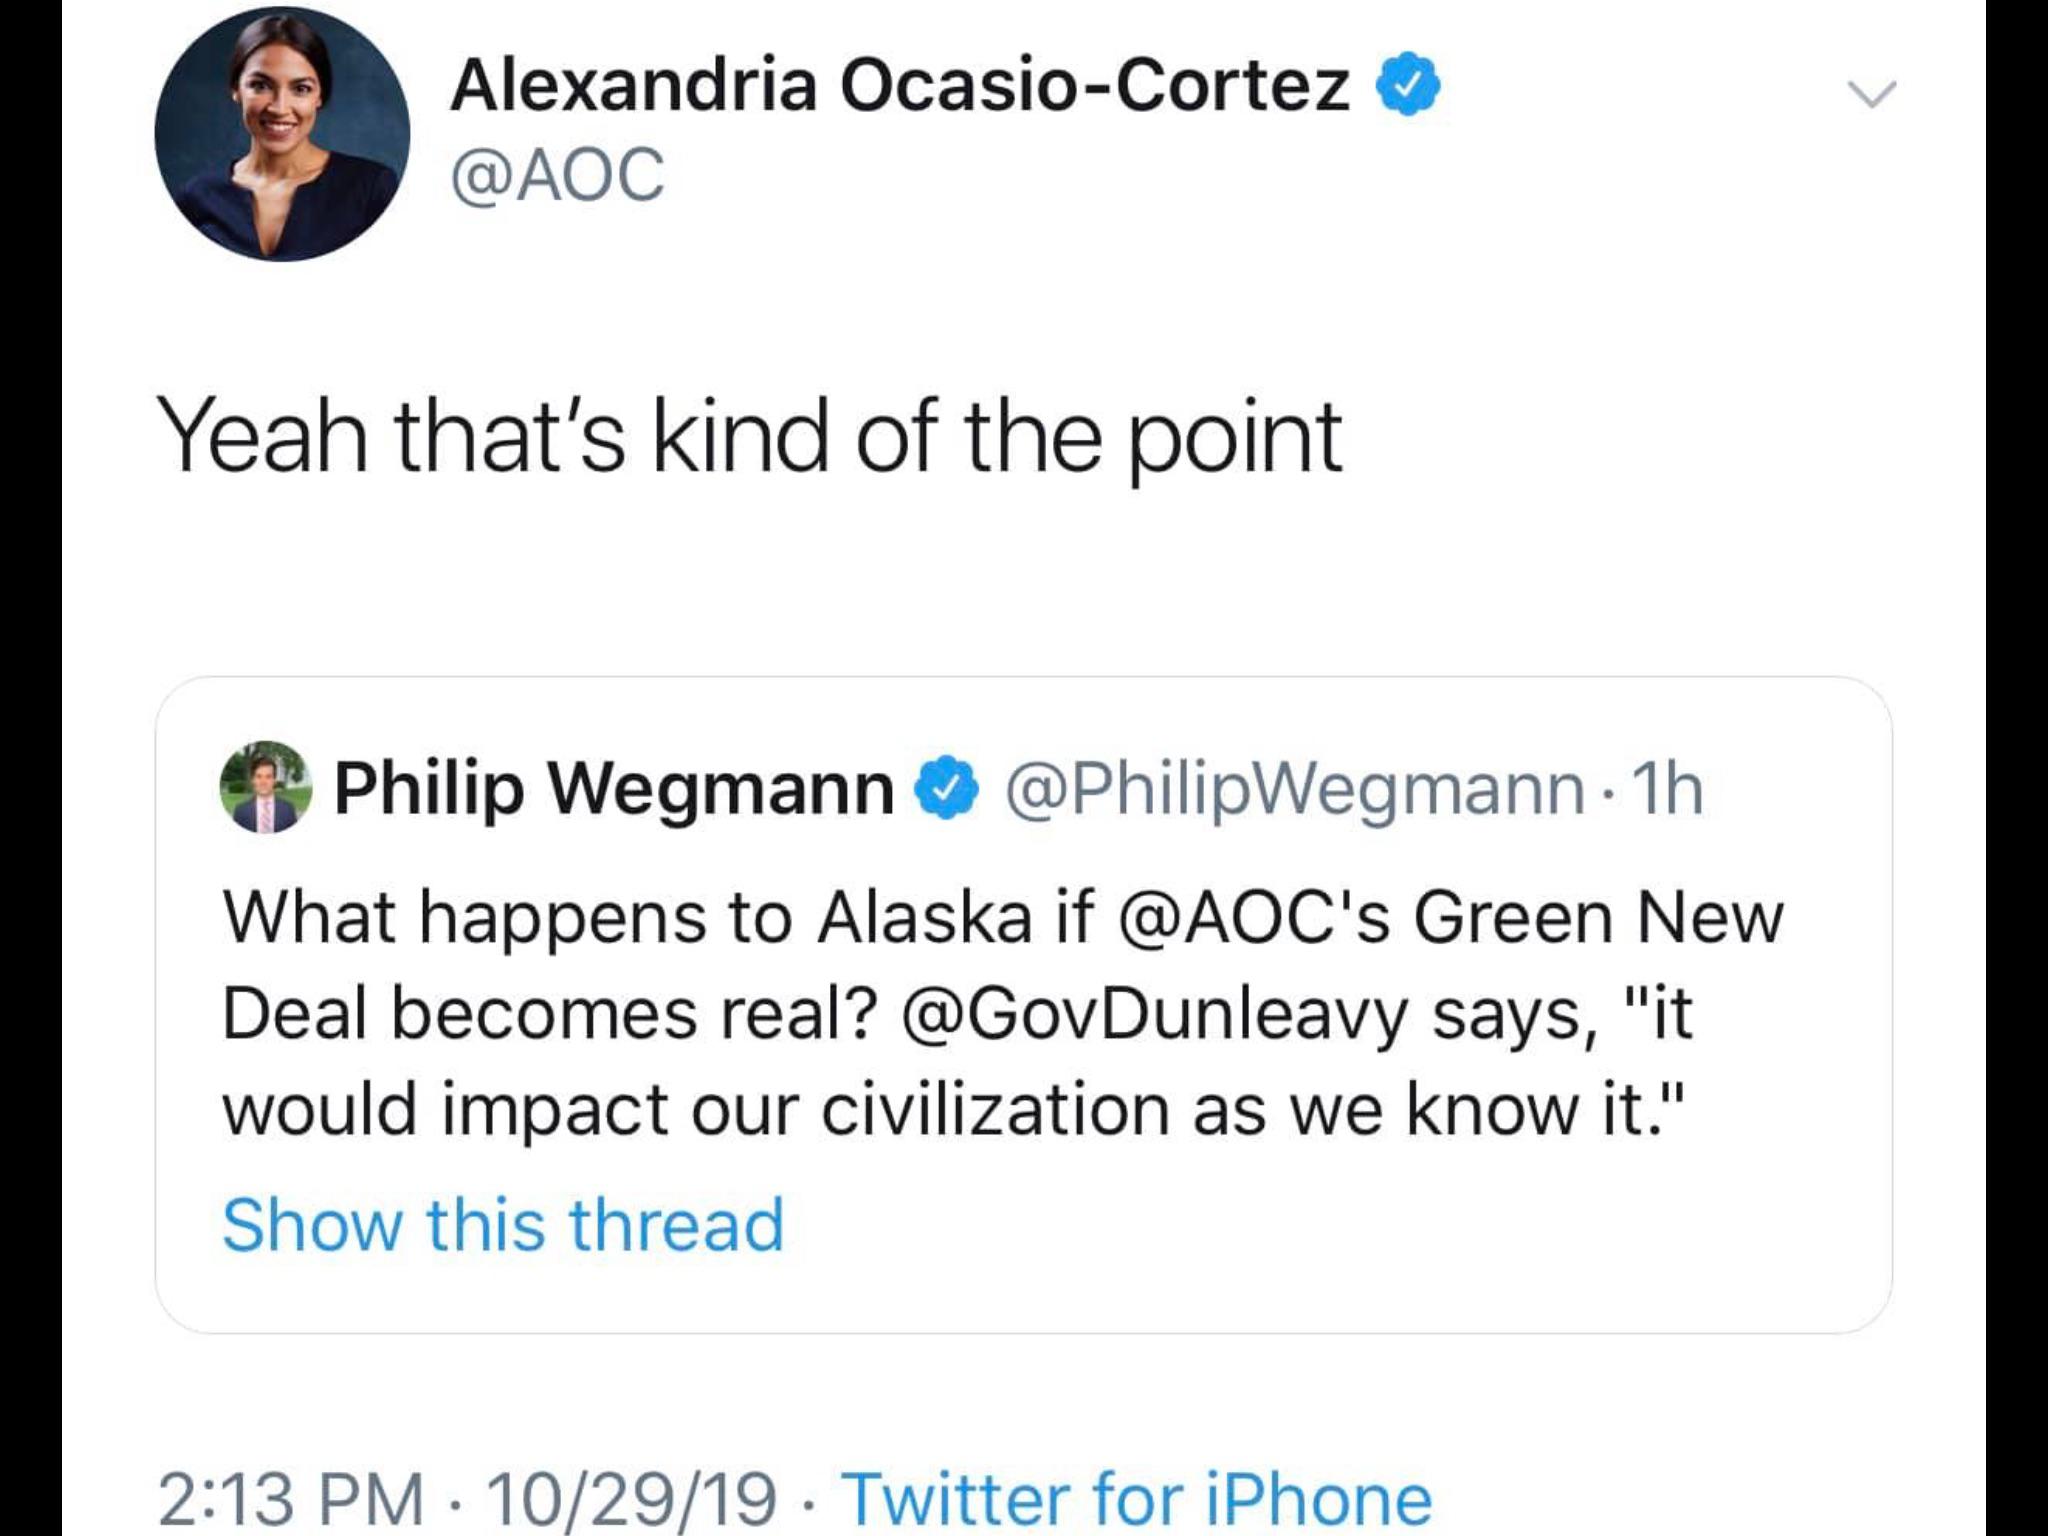 political political-memes political text: Alexandria Ocasio-Cortez @AOC Yeah that's kind of the point Philip Wegmann @PhilipWegmann • lh What happens to Alaska if @AOCIs Green New Deal becomes real? @GovDunleavy says, 